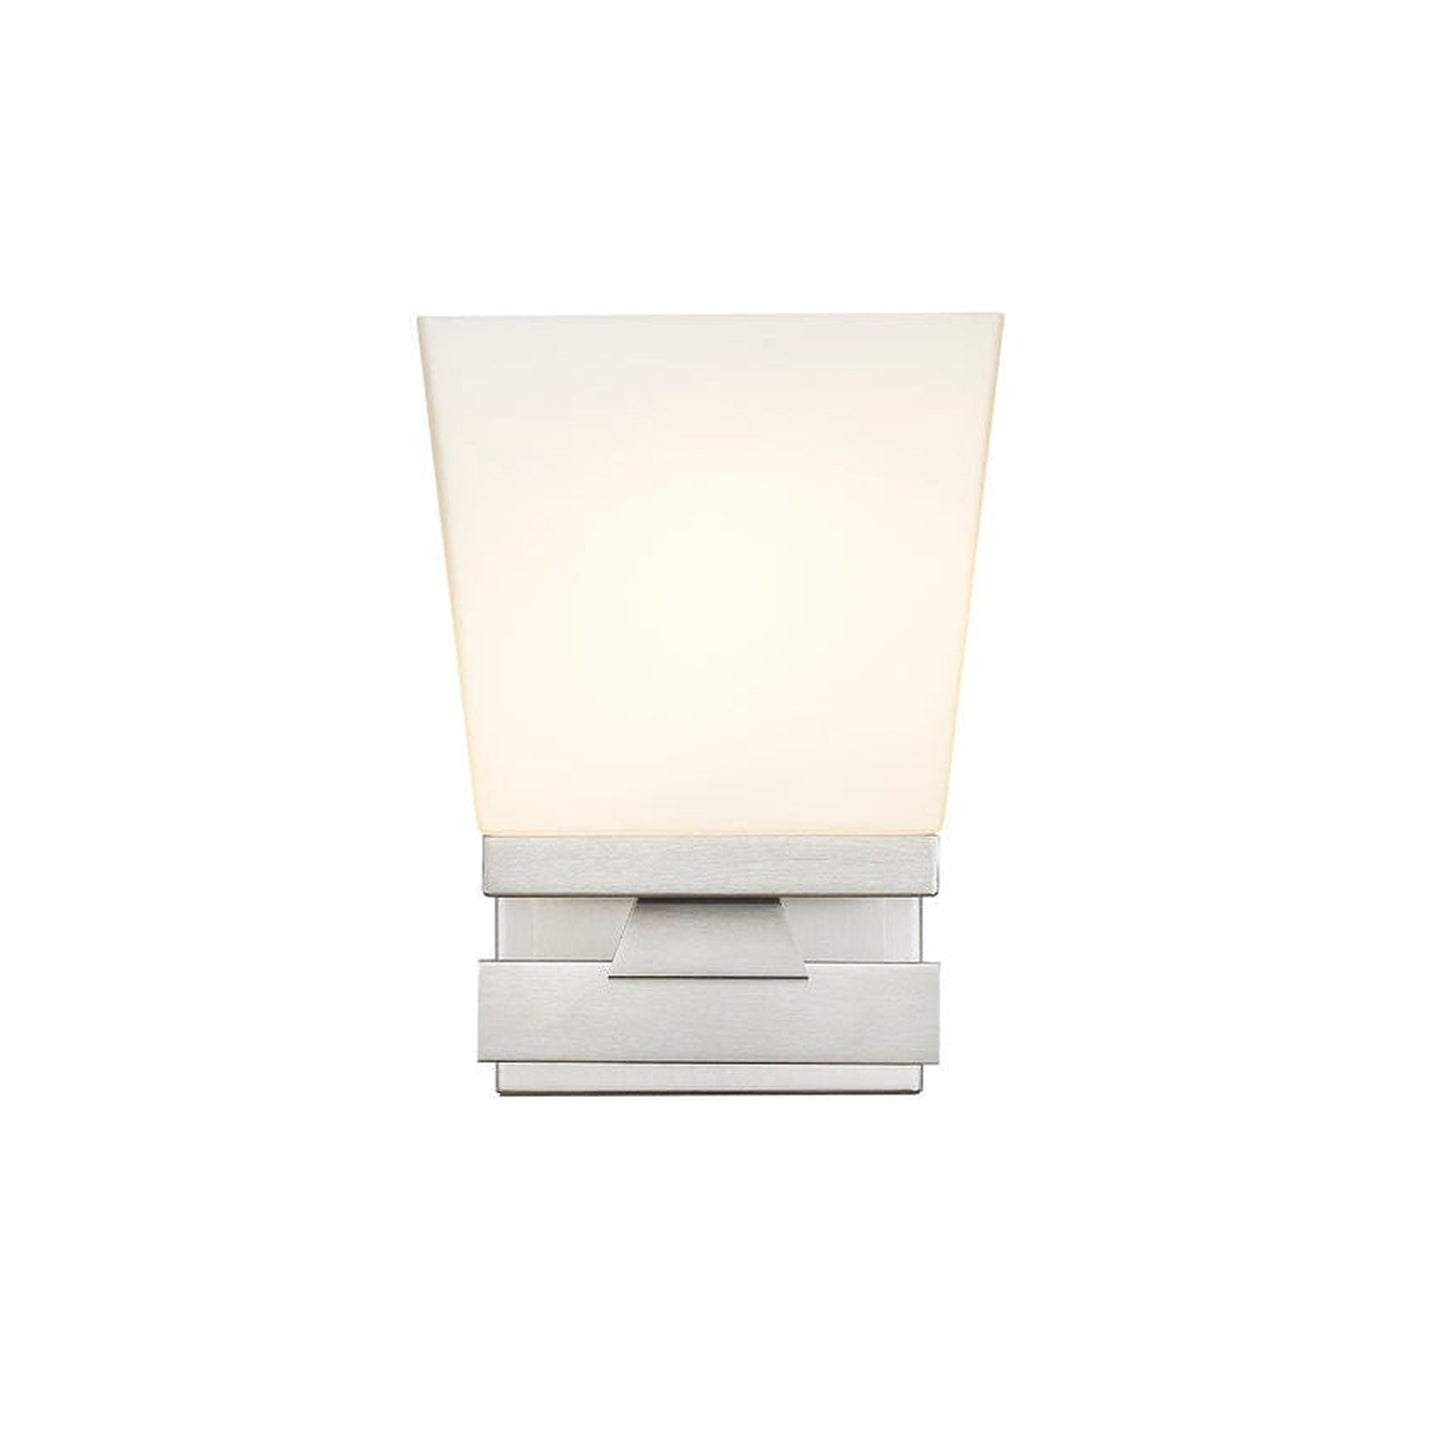 Z-Lite Astor 6" 1-Light Brushed Nickel Wall Sconce With Etched Opal Glass Shade